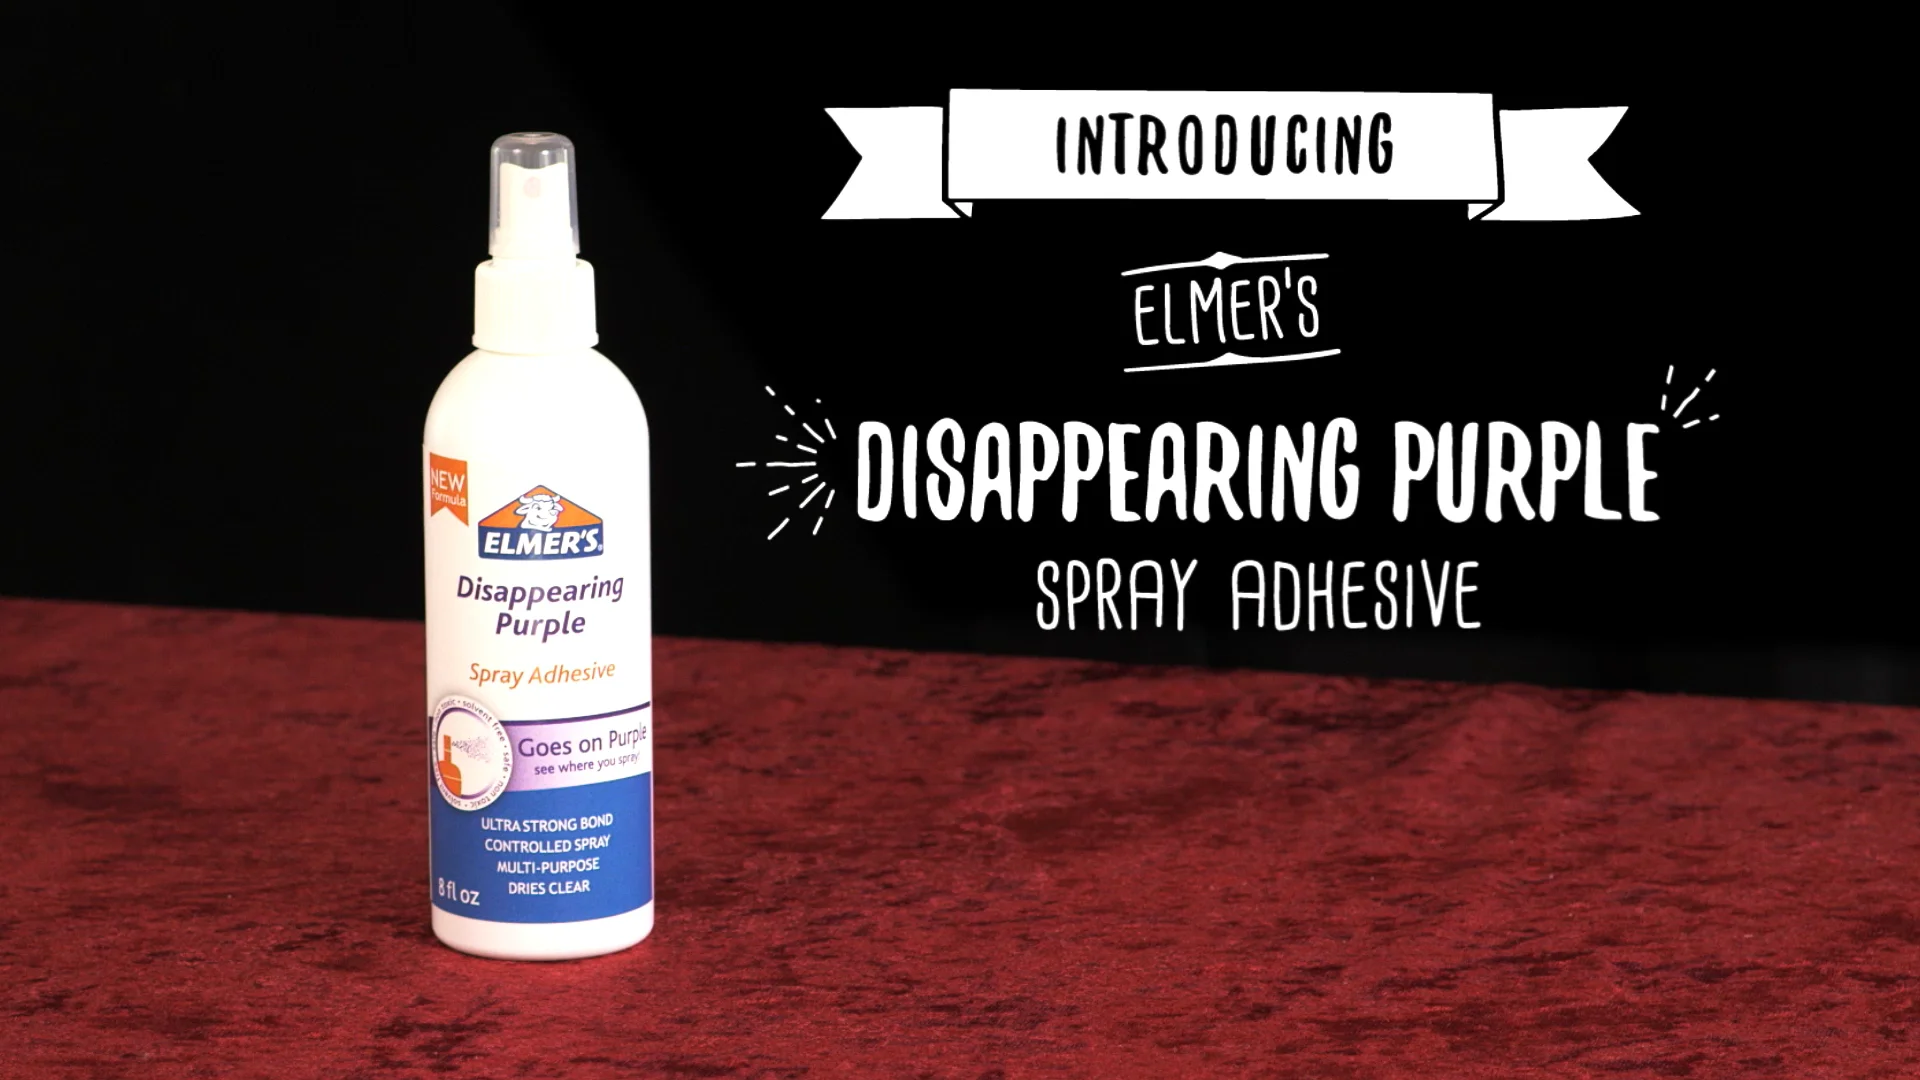 ELMER'S Disappearing Purple 8-oz Spray Adhesive at